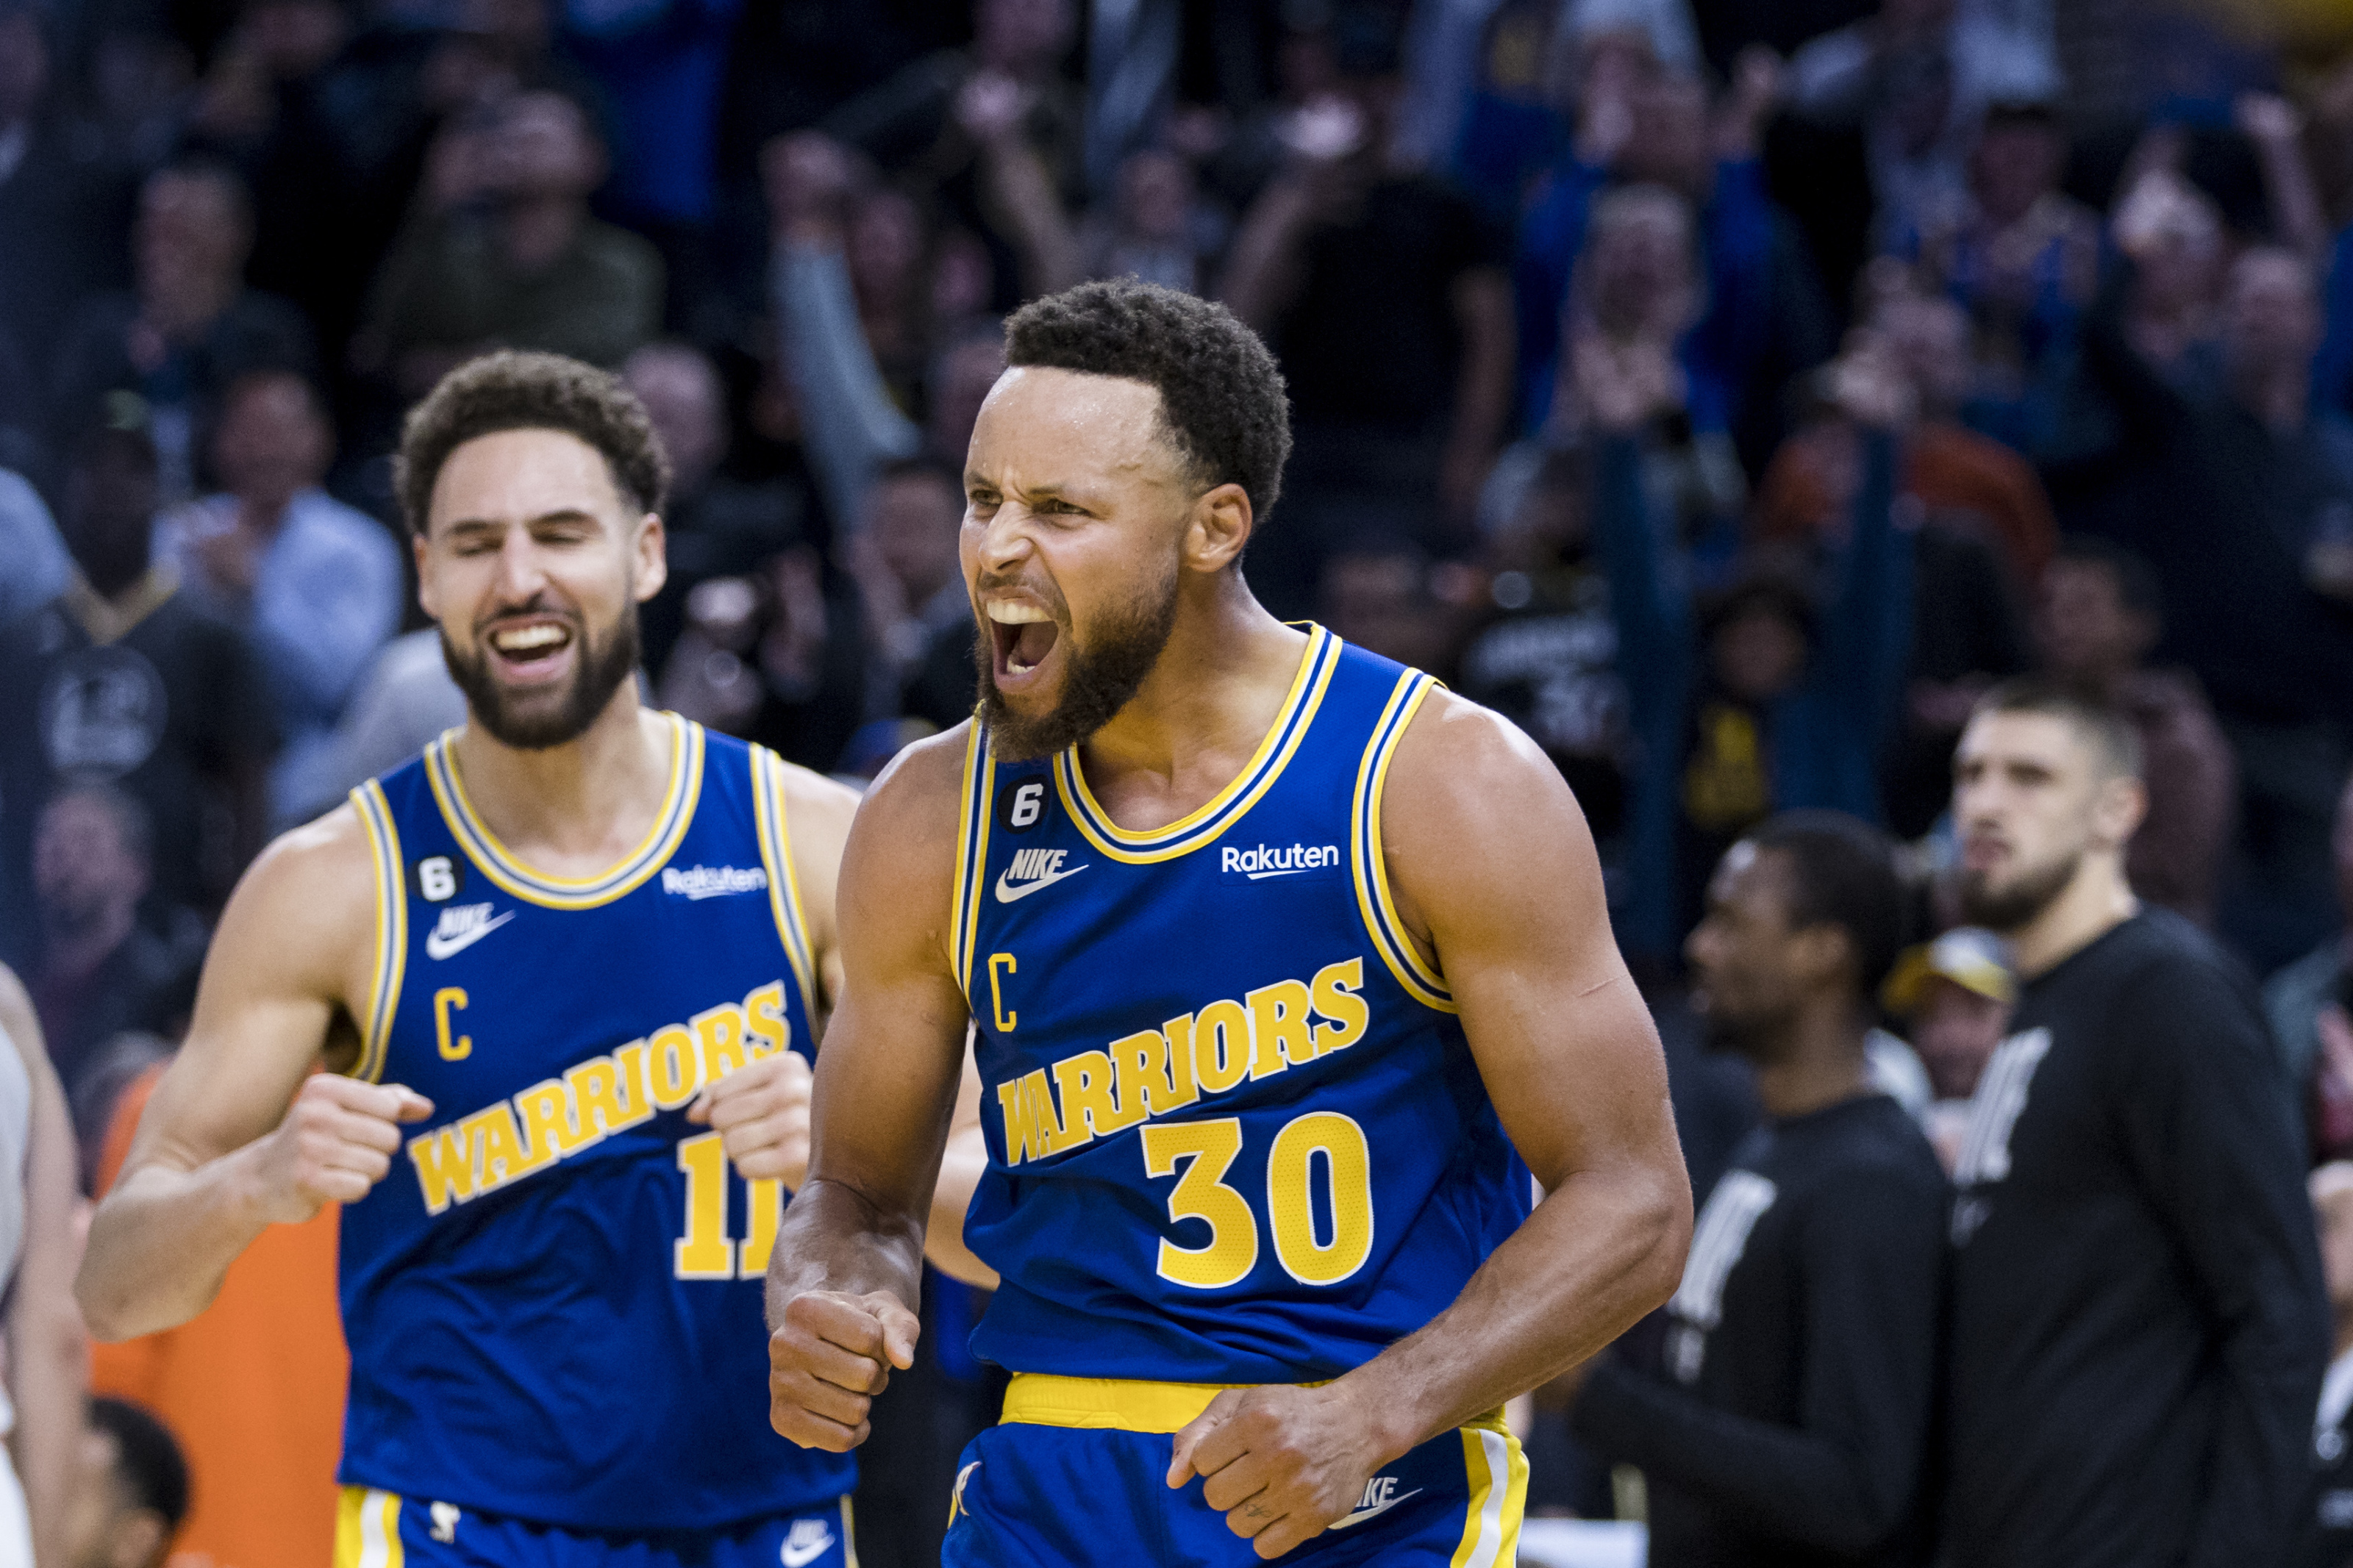 Warriors 'Splash Brothers' to start in NBA All-Star Game